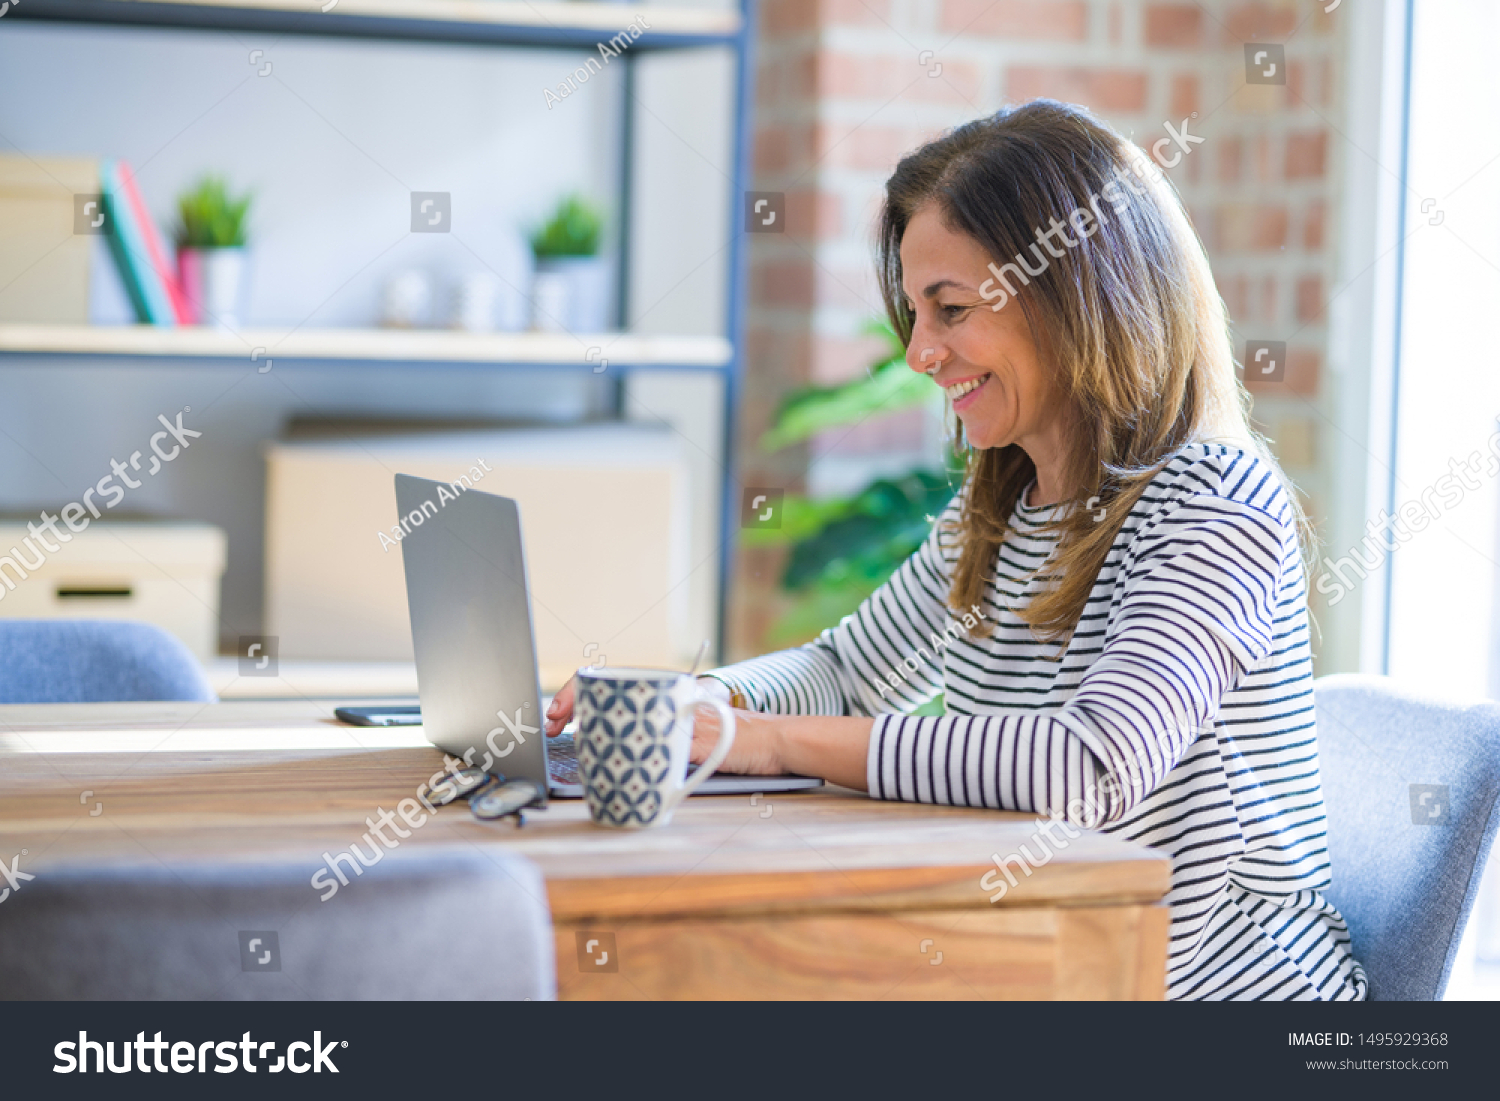 Middle age senior woman sitting at the table at home working using computer laptop with a happy face standing and smiling with a confident smile showing teeth #1495929368